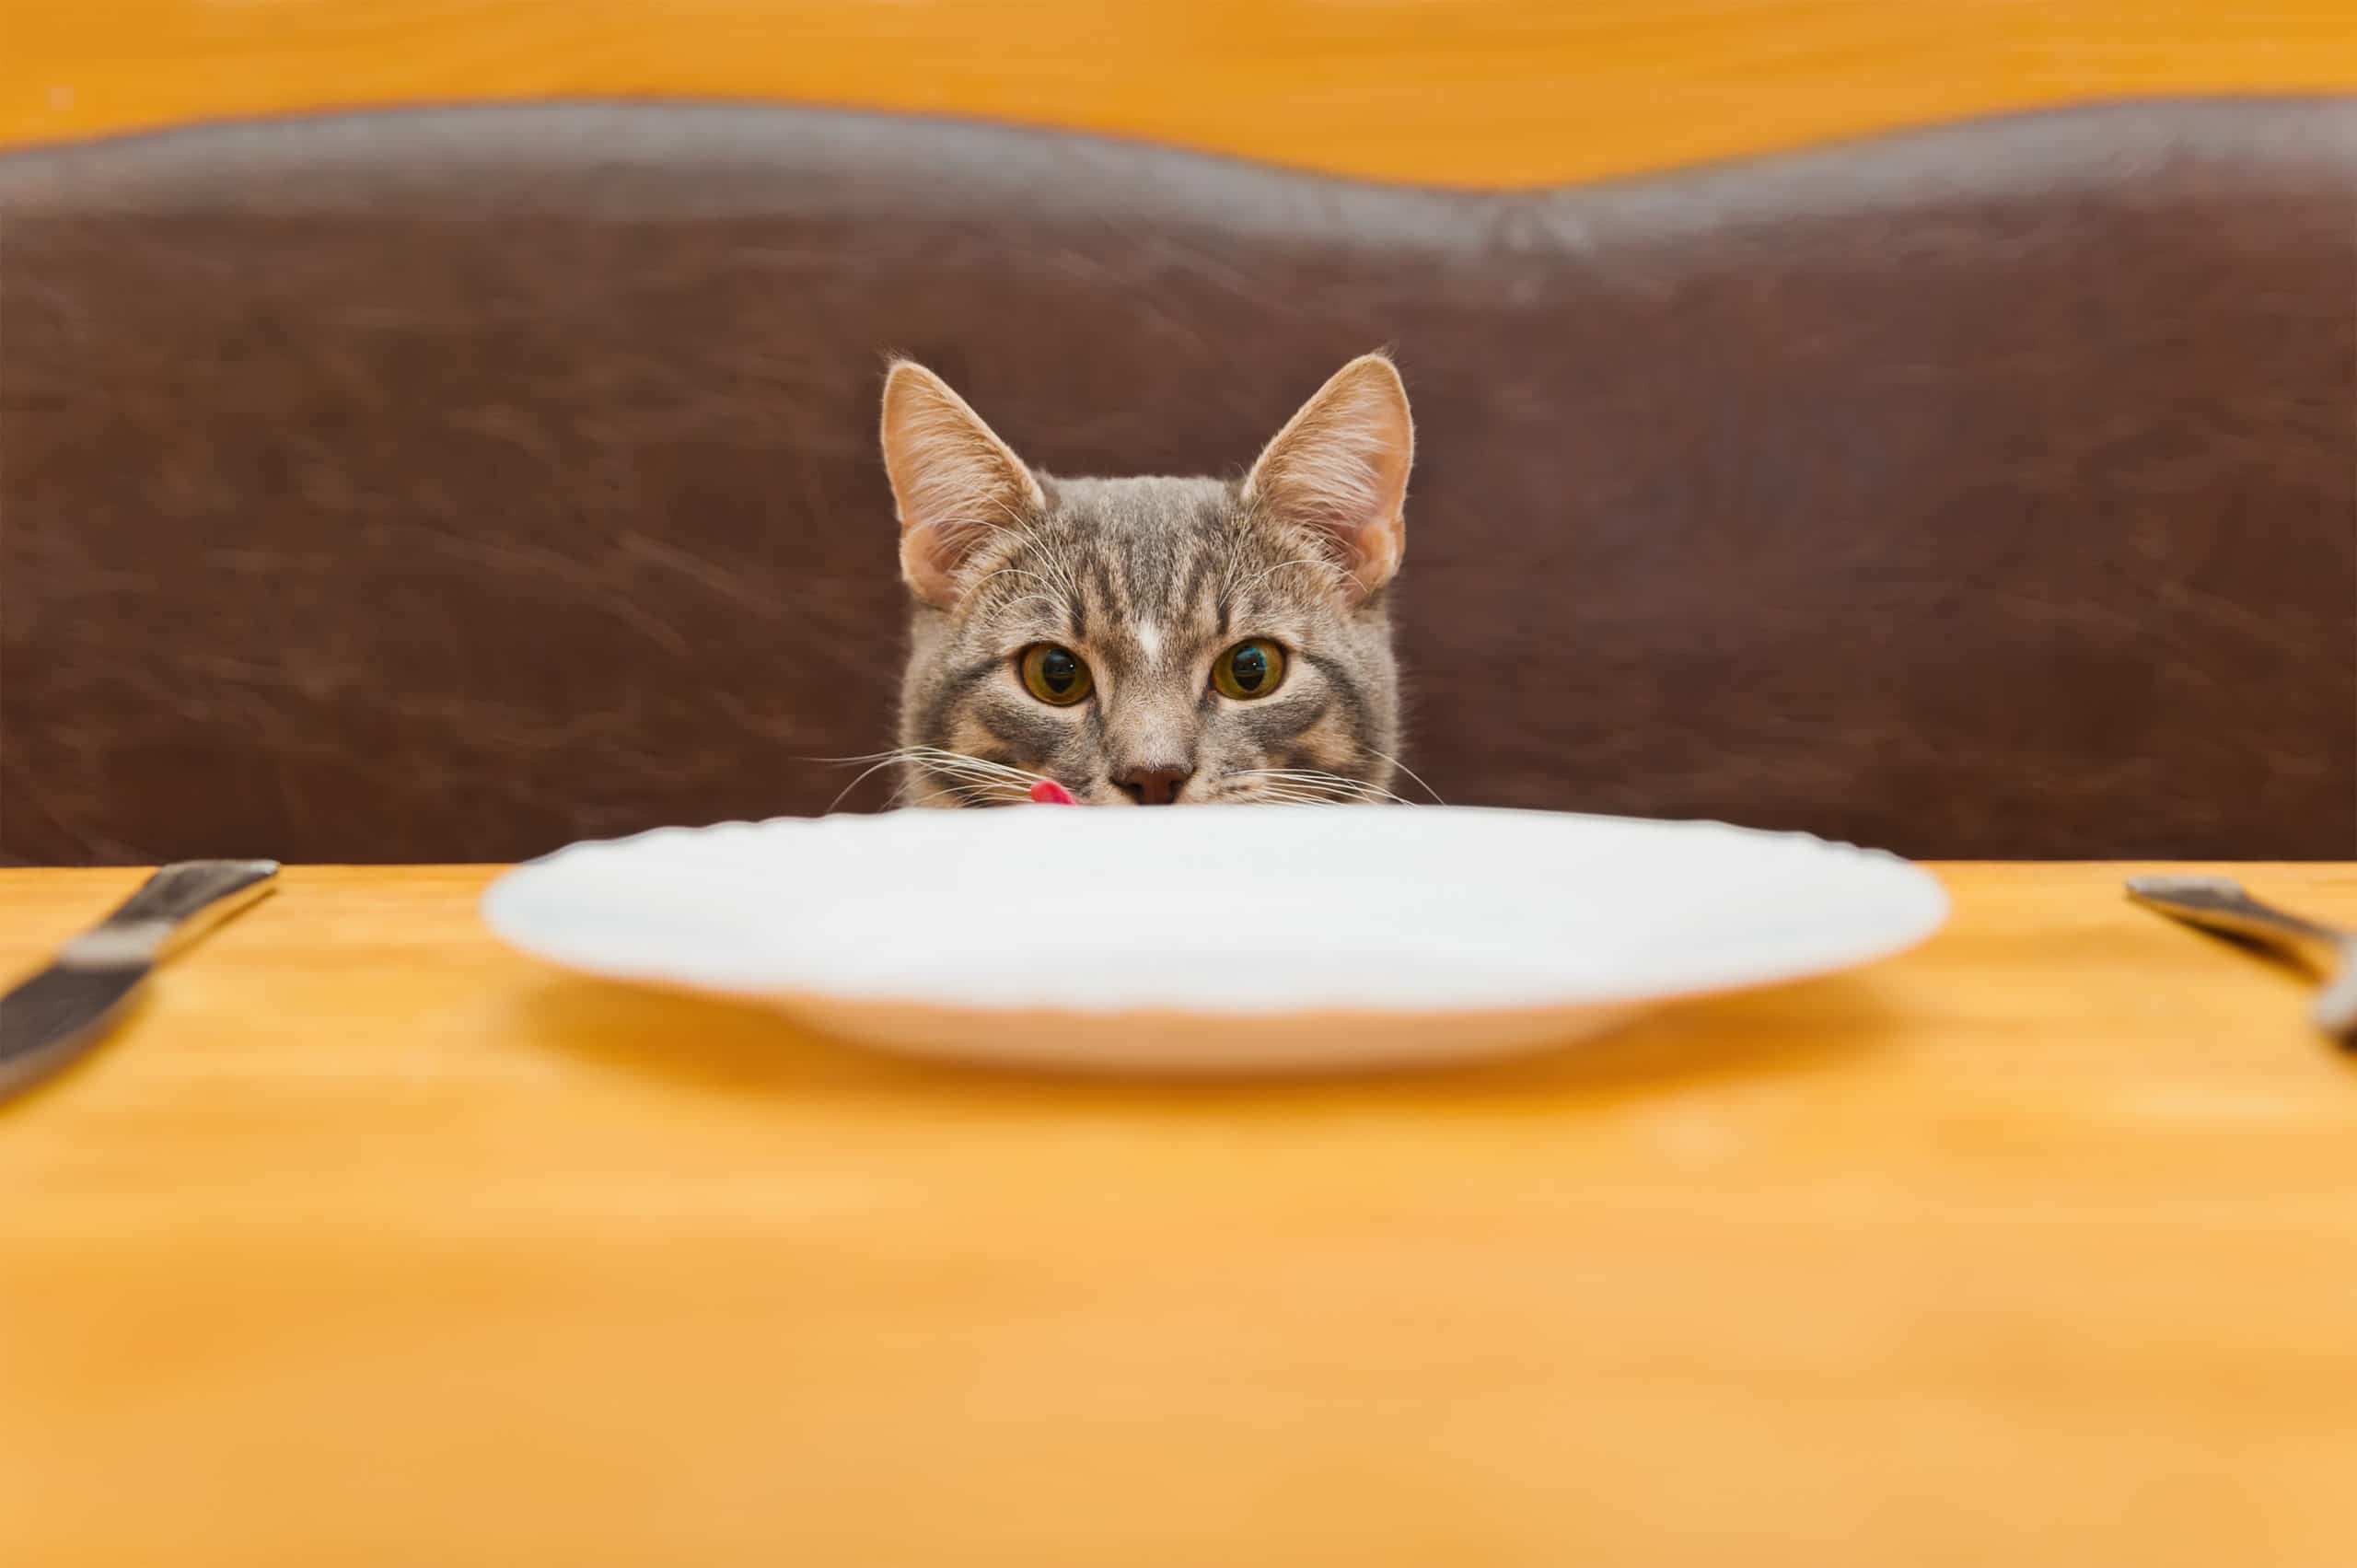 Cat ready to eat